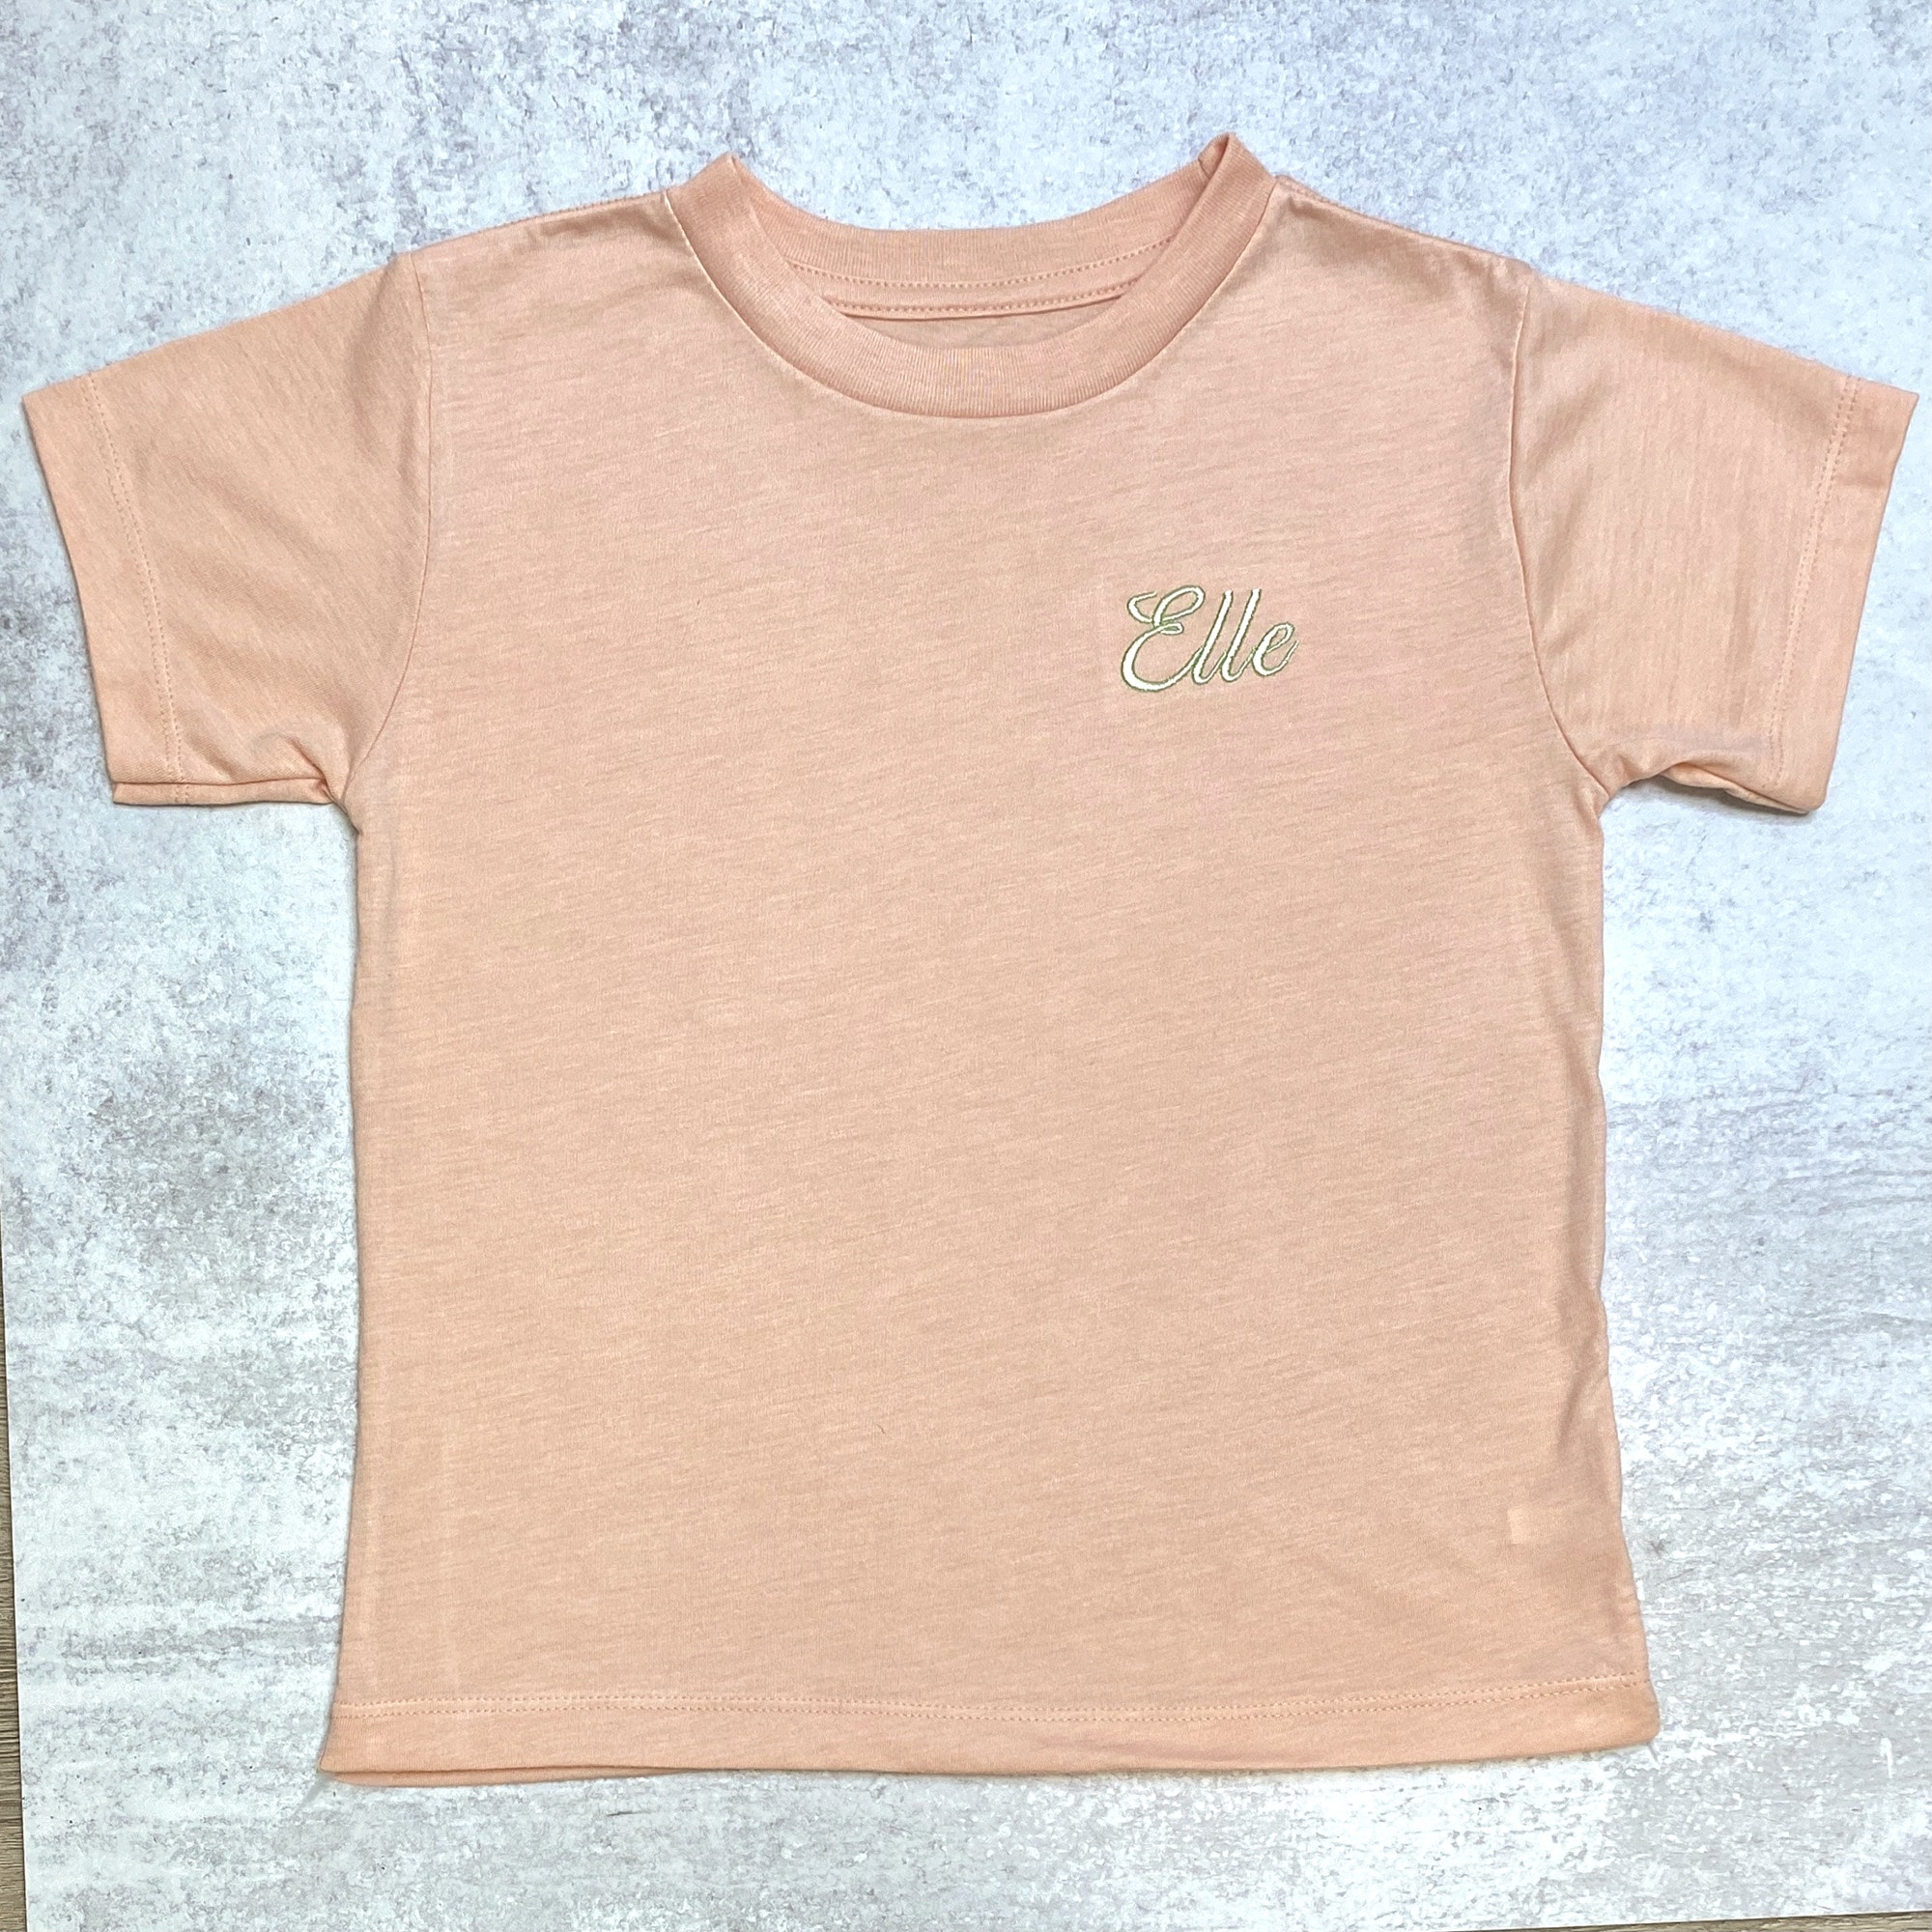 Toddler Triblend Short Sleeve Tee - Embroidered with a Name - MARCELA